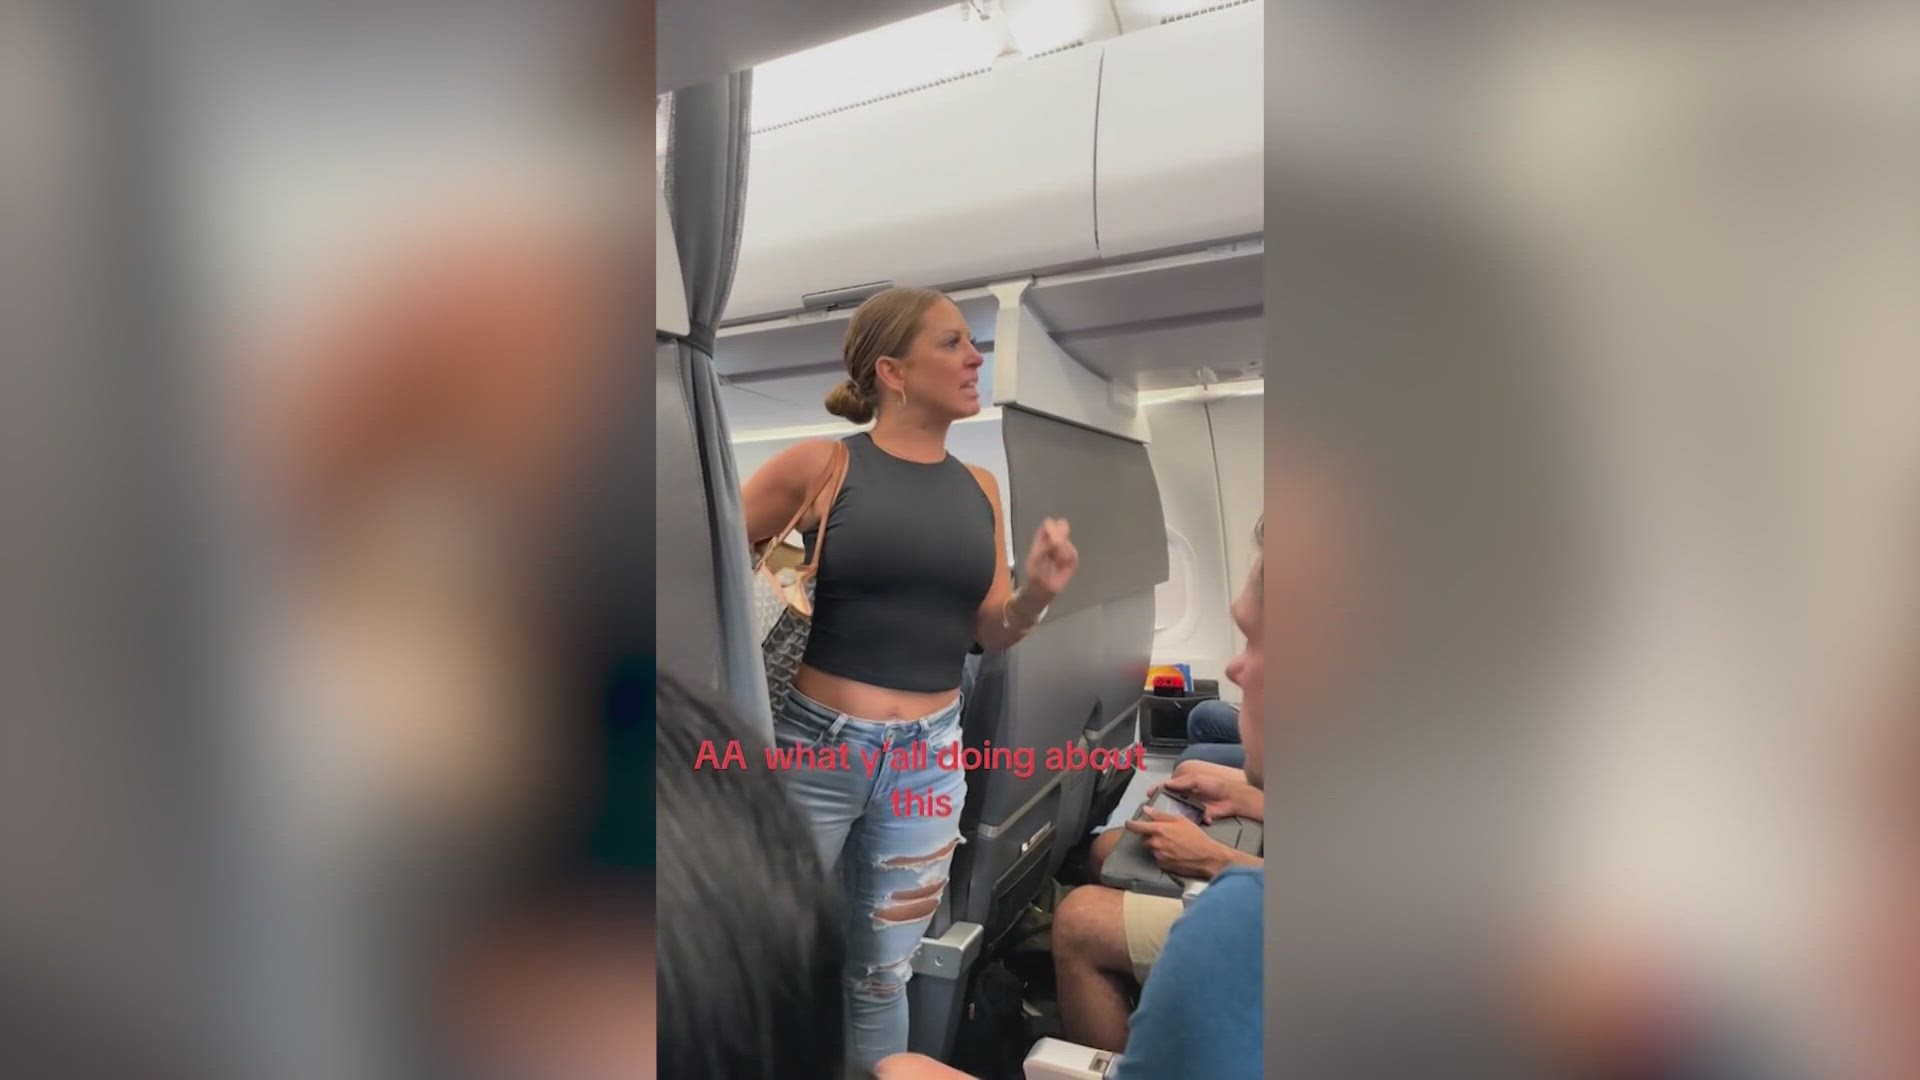 A TikTok user shared video of a woman, now identified as Tiffany, walking to the front of the plane saying someone in the back of the plane was "not real."